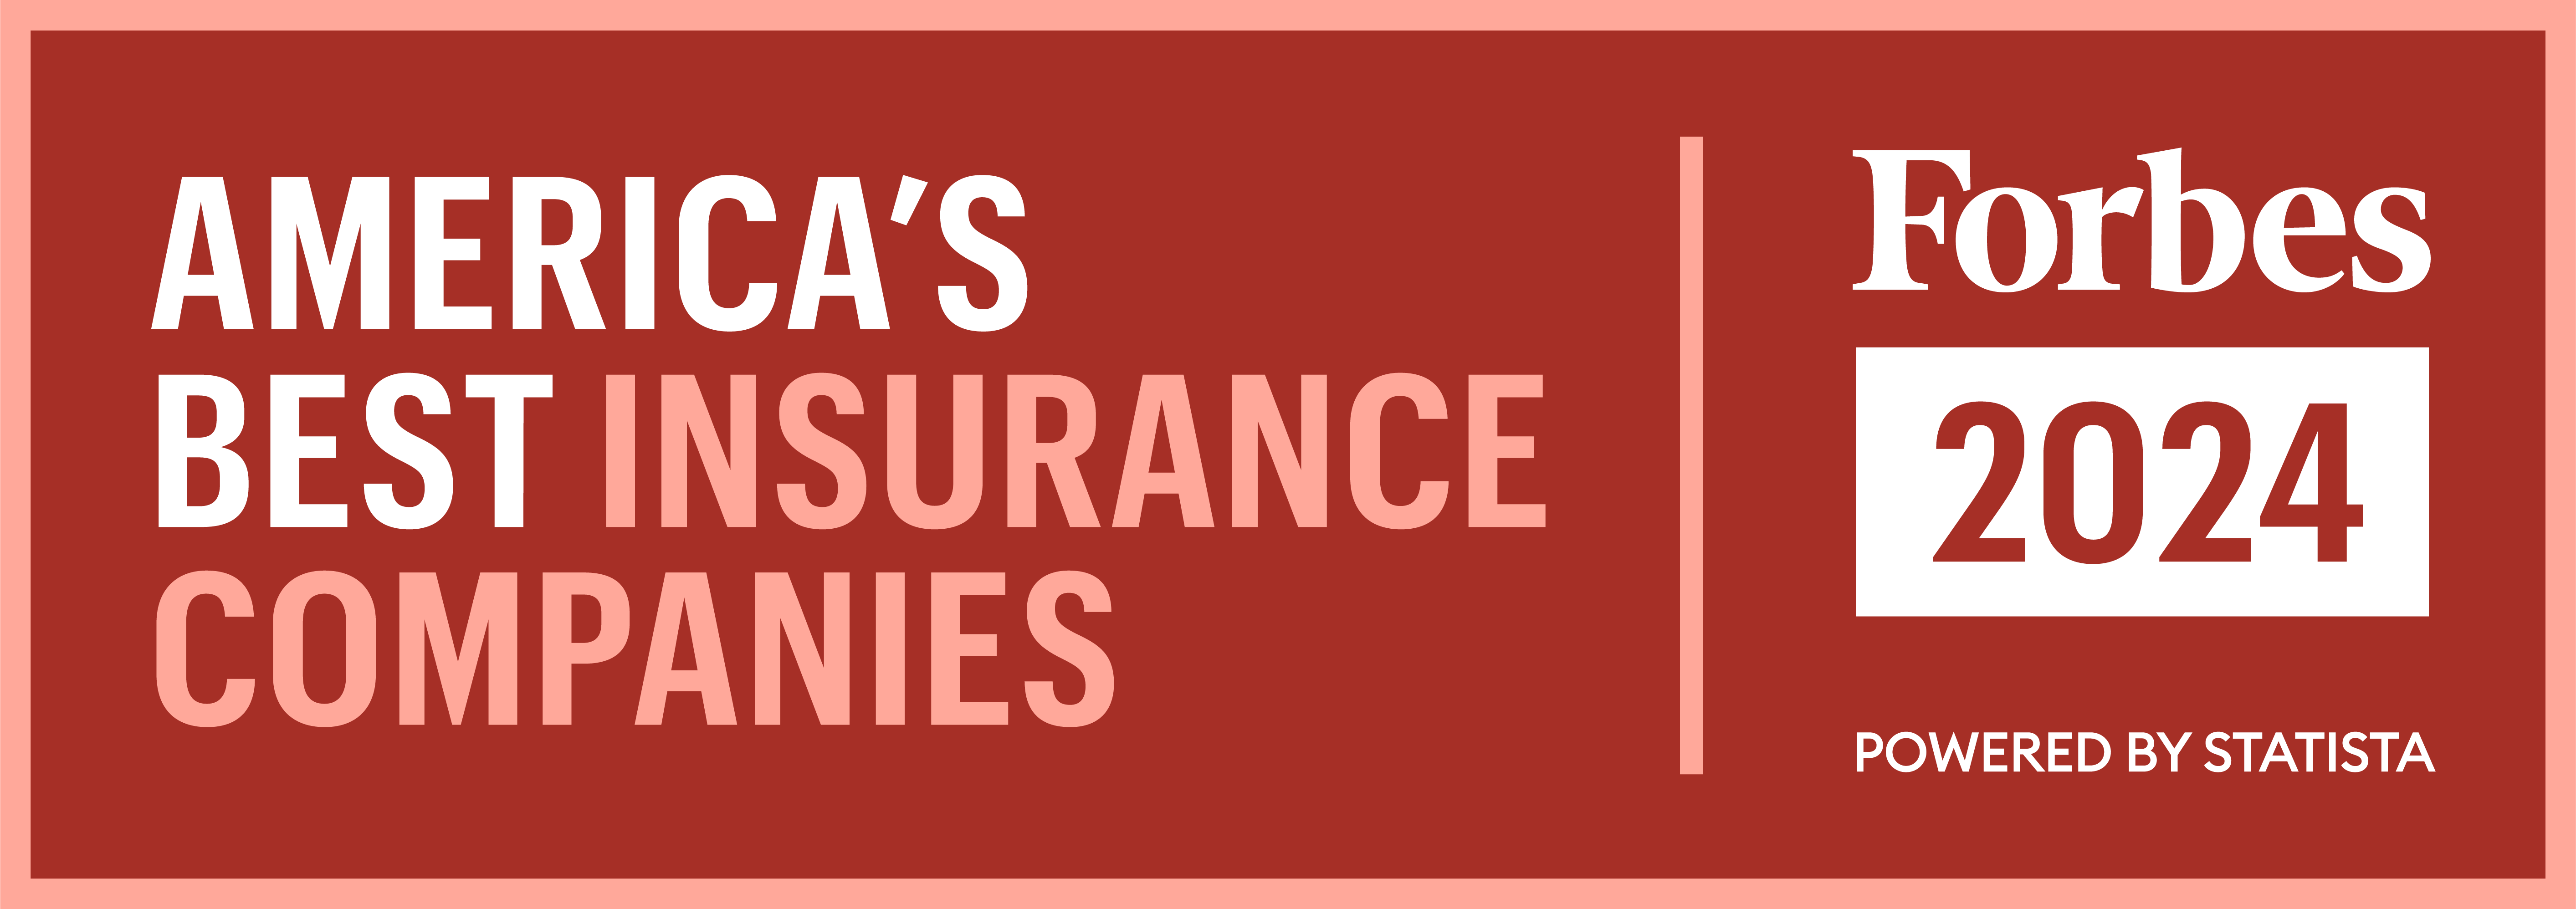 Forbes 2024 America's best insurance company